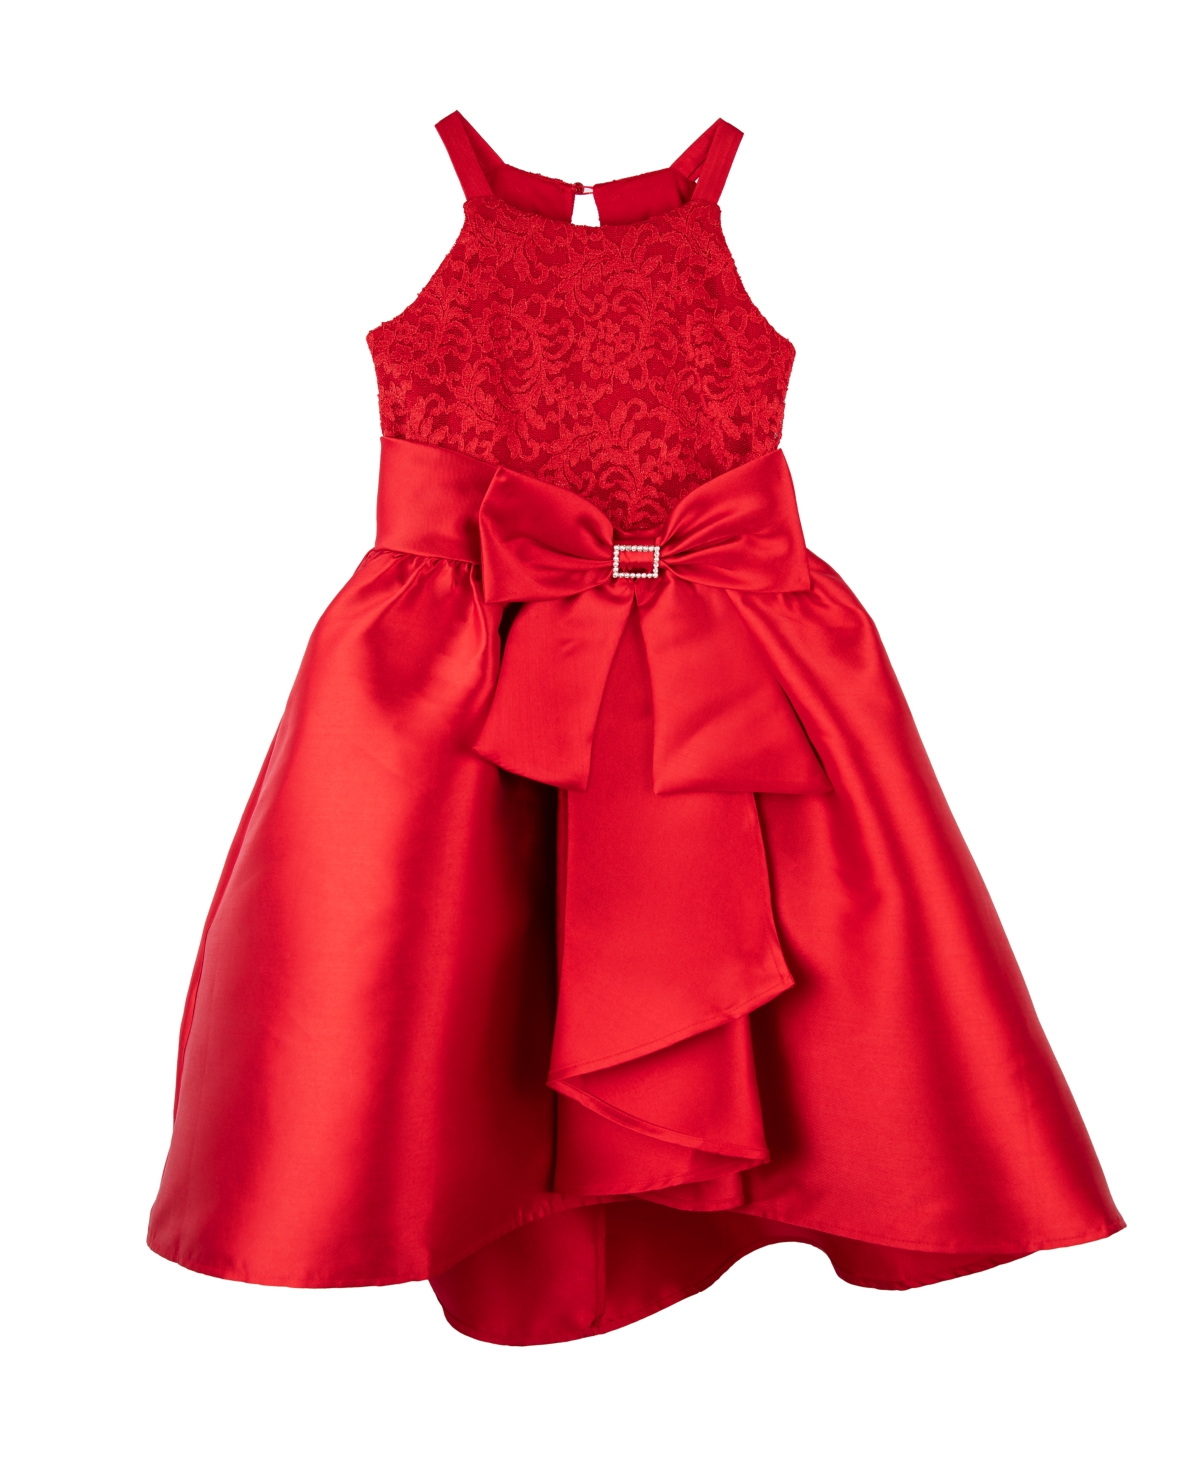 Emerald Sundae Kids' Big Girls Sleeveless Bow-front Party Dress In Red